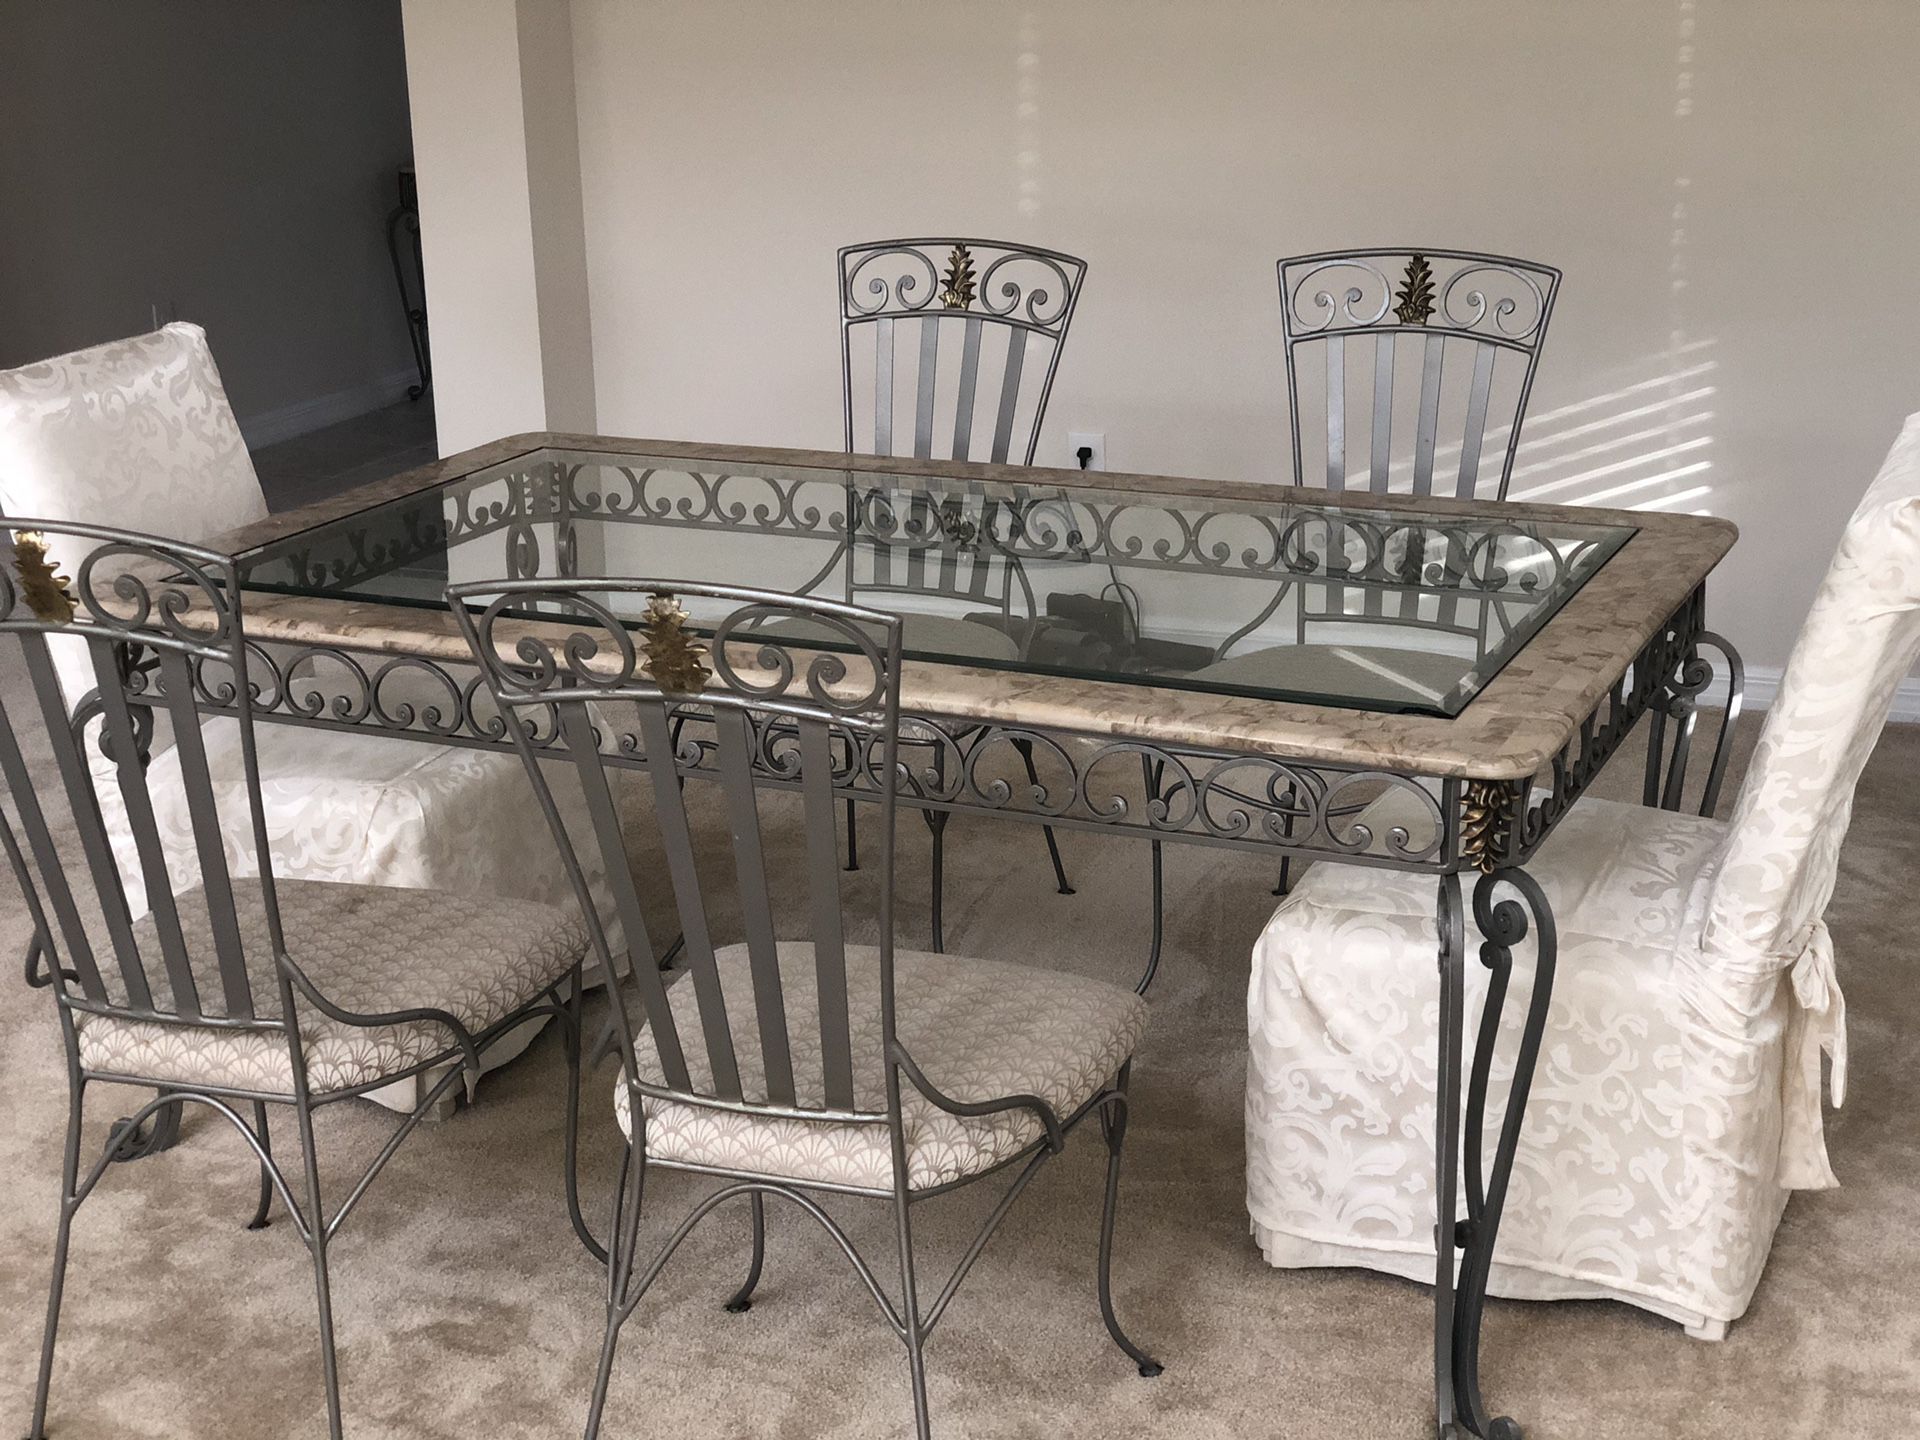 Dining table, 6 chairs, coffee table, 2 end tables